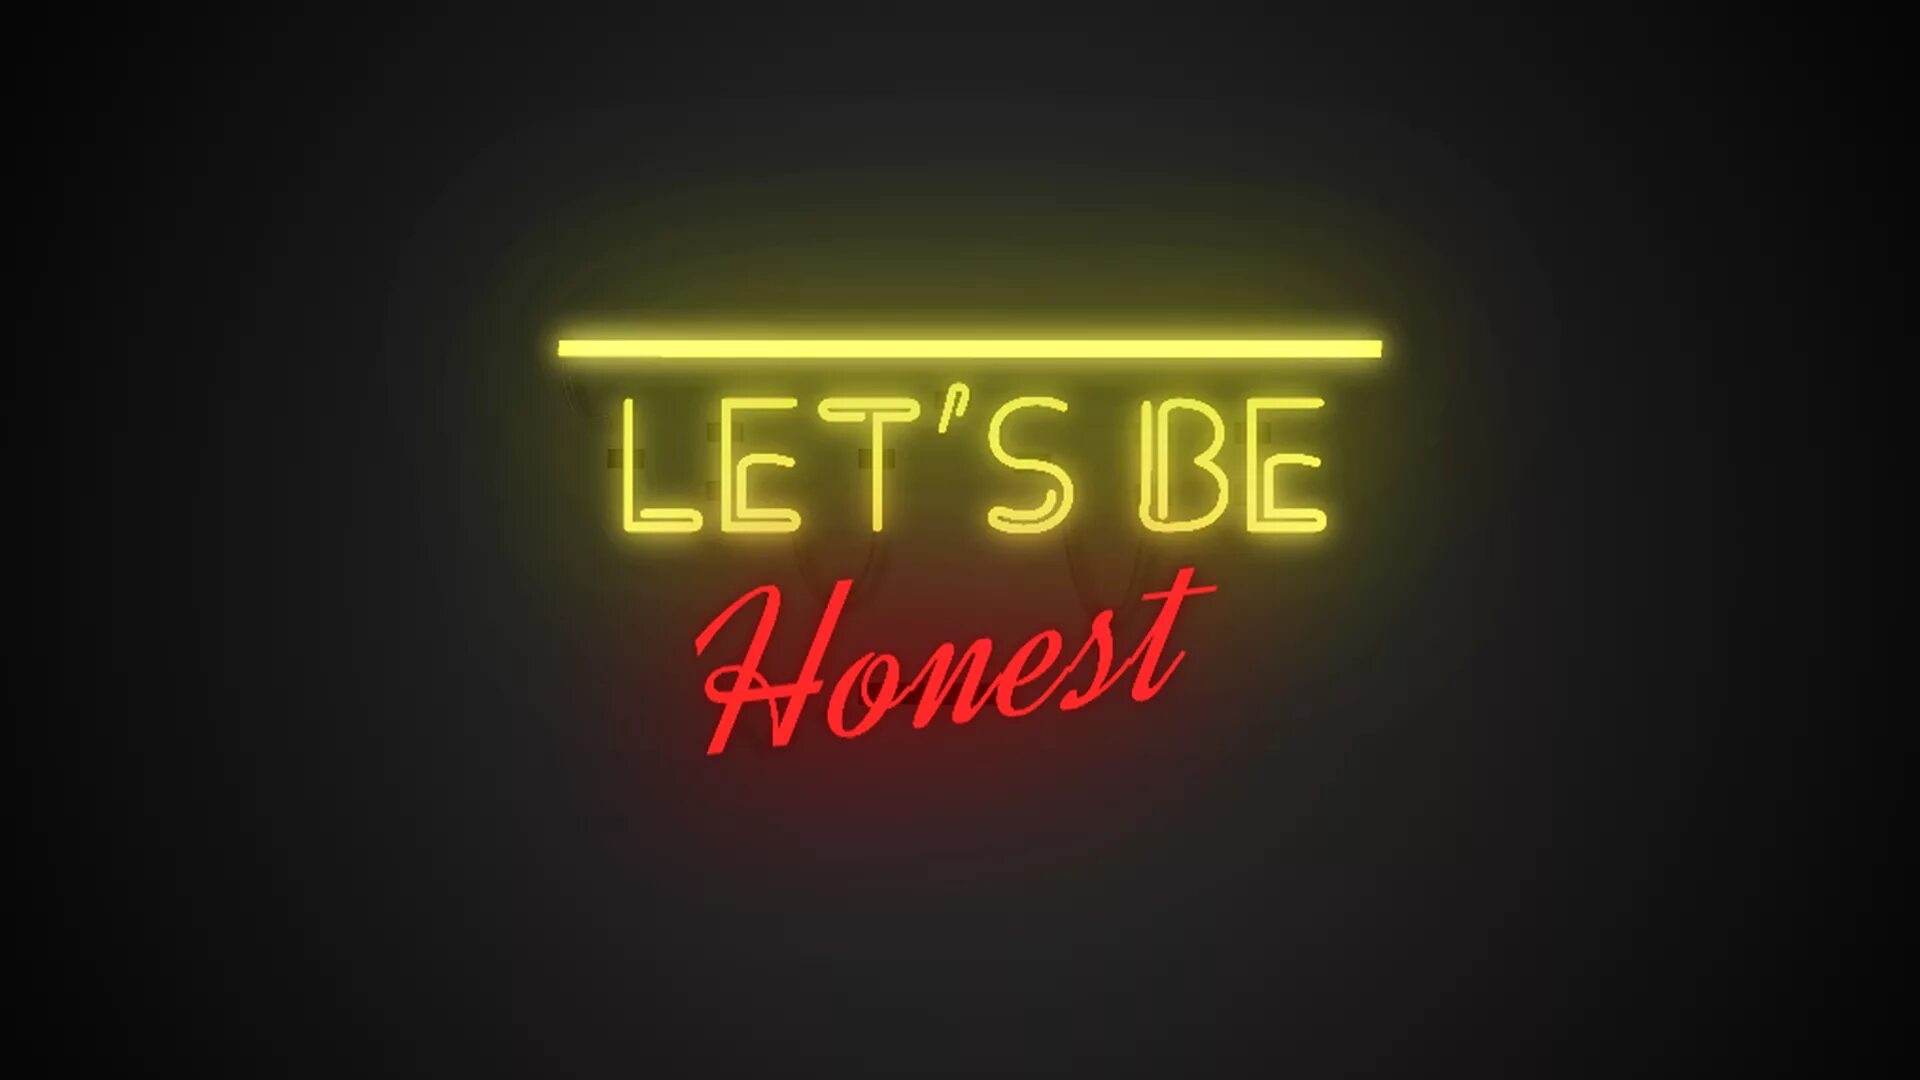 Let s hear. Let картинка. Надпись honesty. Lets. Honest картинки.